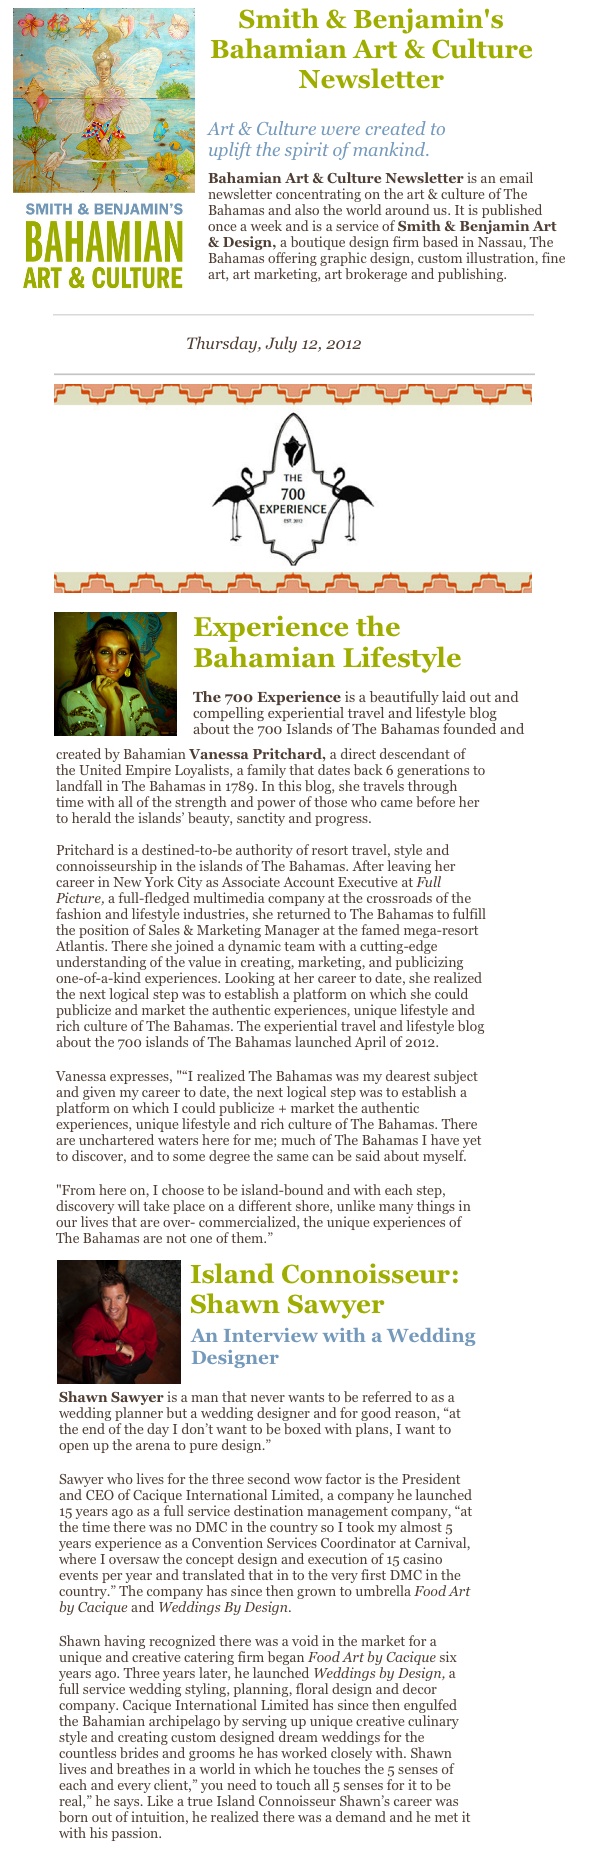 PRESS: The 700 Experience as featured in Smith + Benjamin’s Bahamian Art + Culture eNewsletter